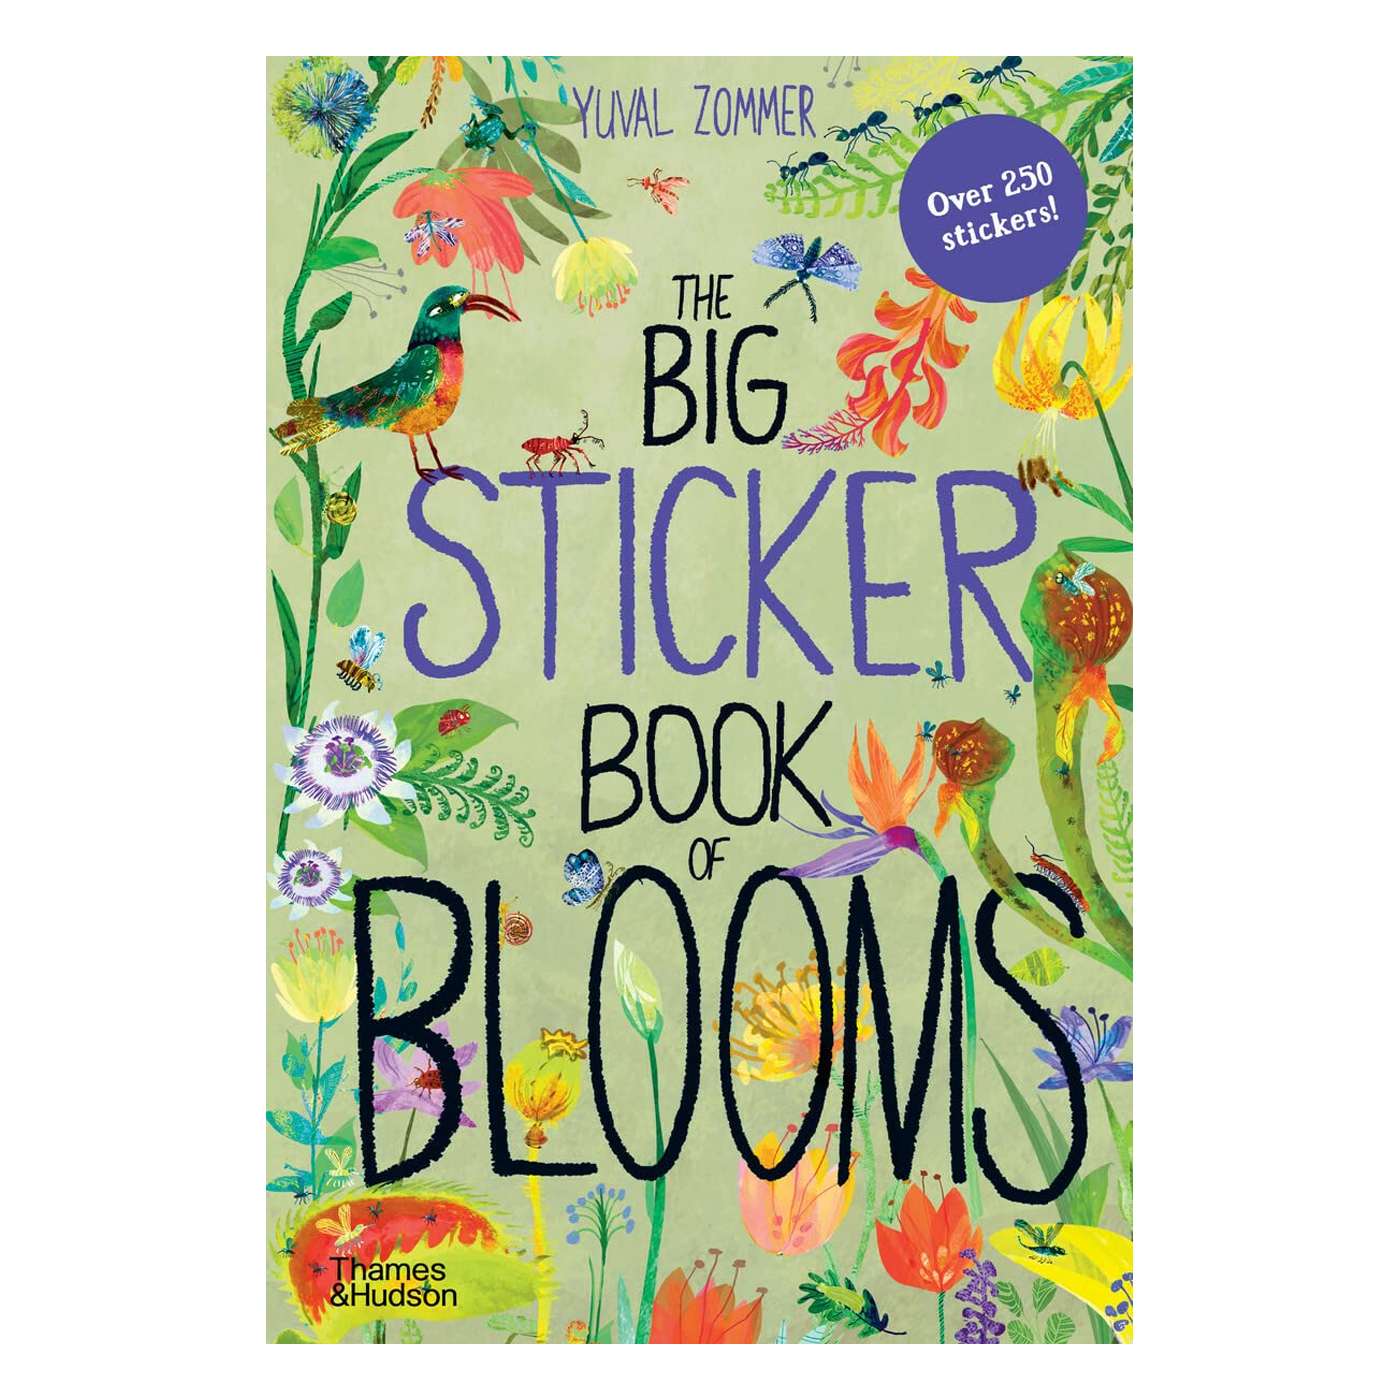  The Big Sticker Book of Blooms